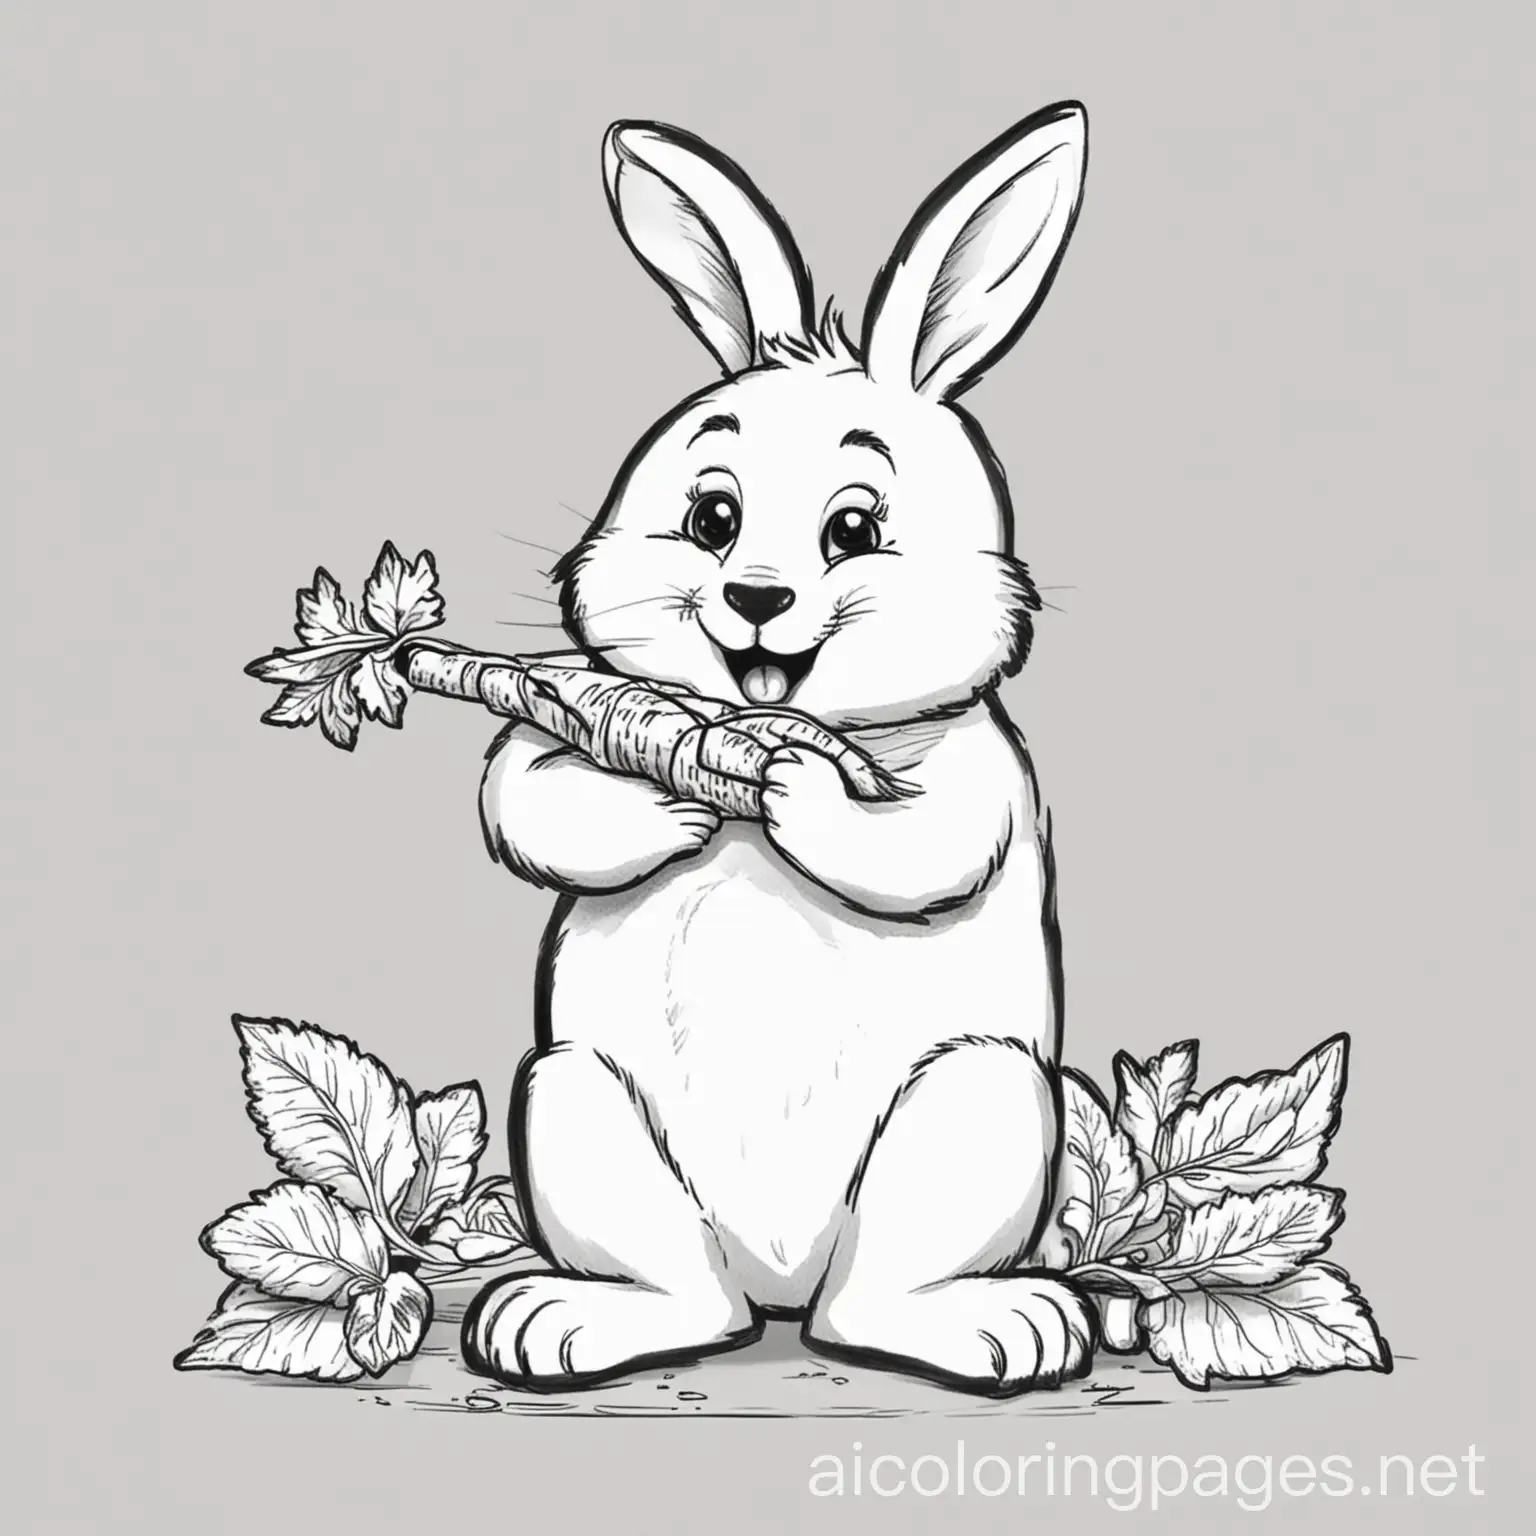 Happy Rabbit eating carrot, Coloring Page, black and white, line art, white background, Simplicity, Ample White Space. The background of the coloring page is plain white to make it easy for young children to color within the lines. The outlines of all the subjects are easy to distinguish, making it simple for kids to color without too much difficulty